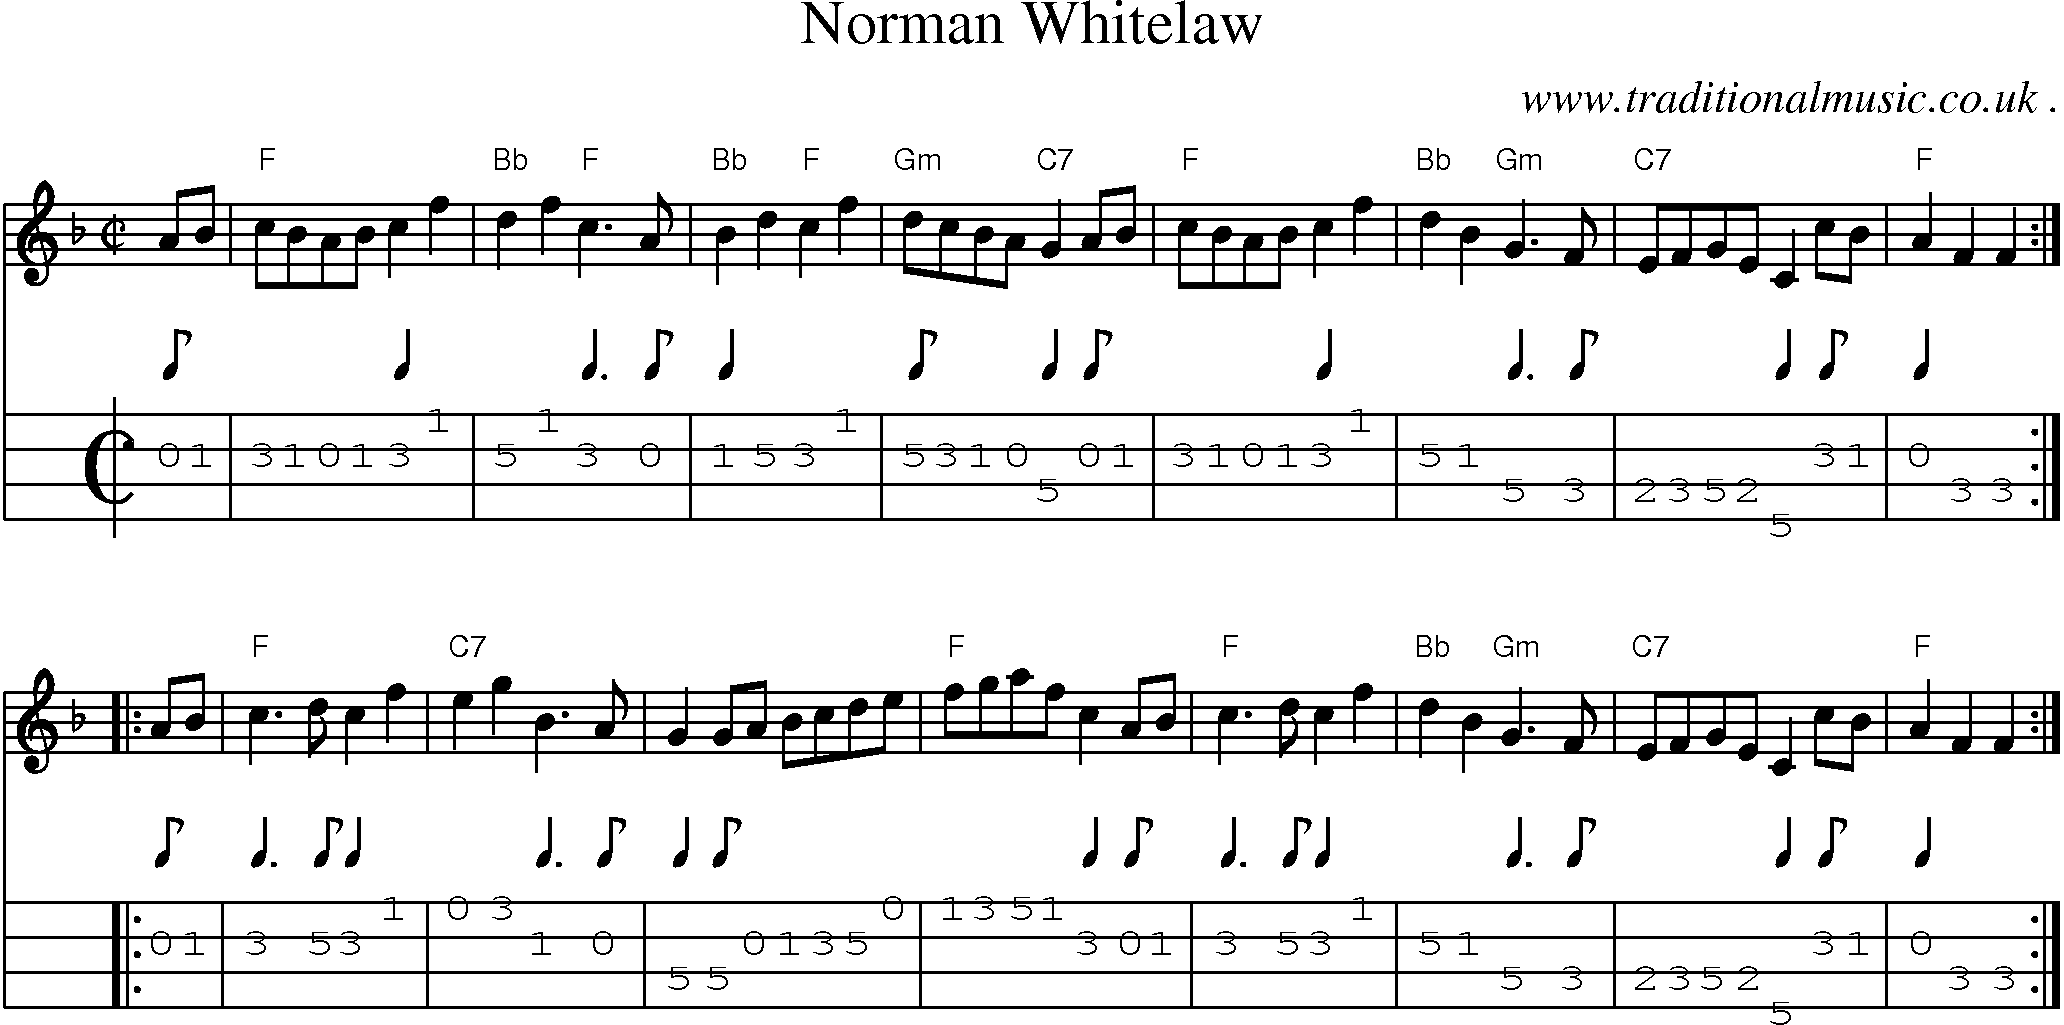 Sheet-music  score, Chords and Mandolin Tabs for Norman Whitelaw